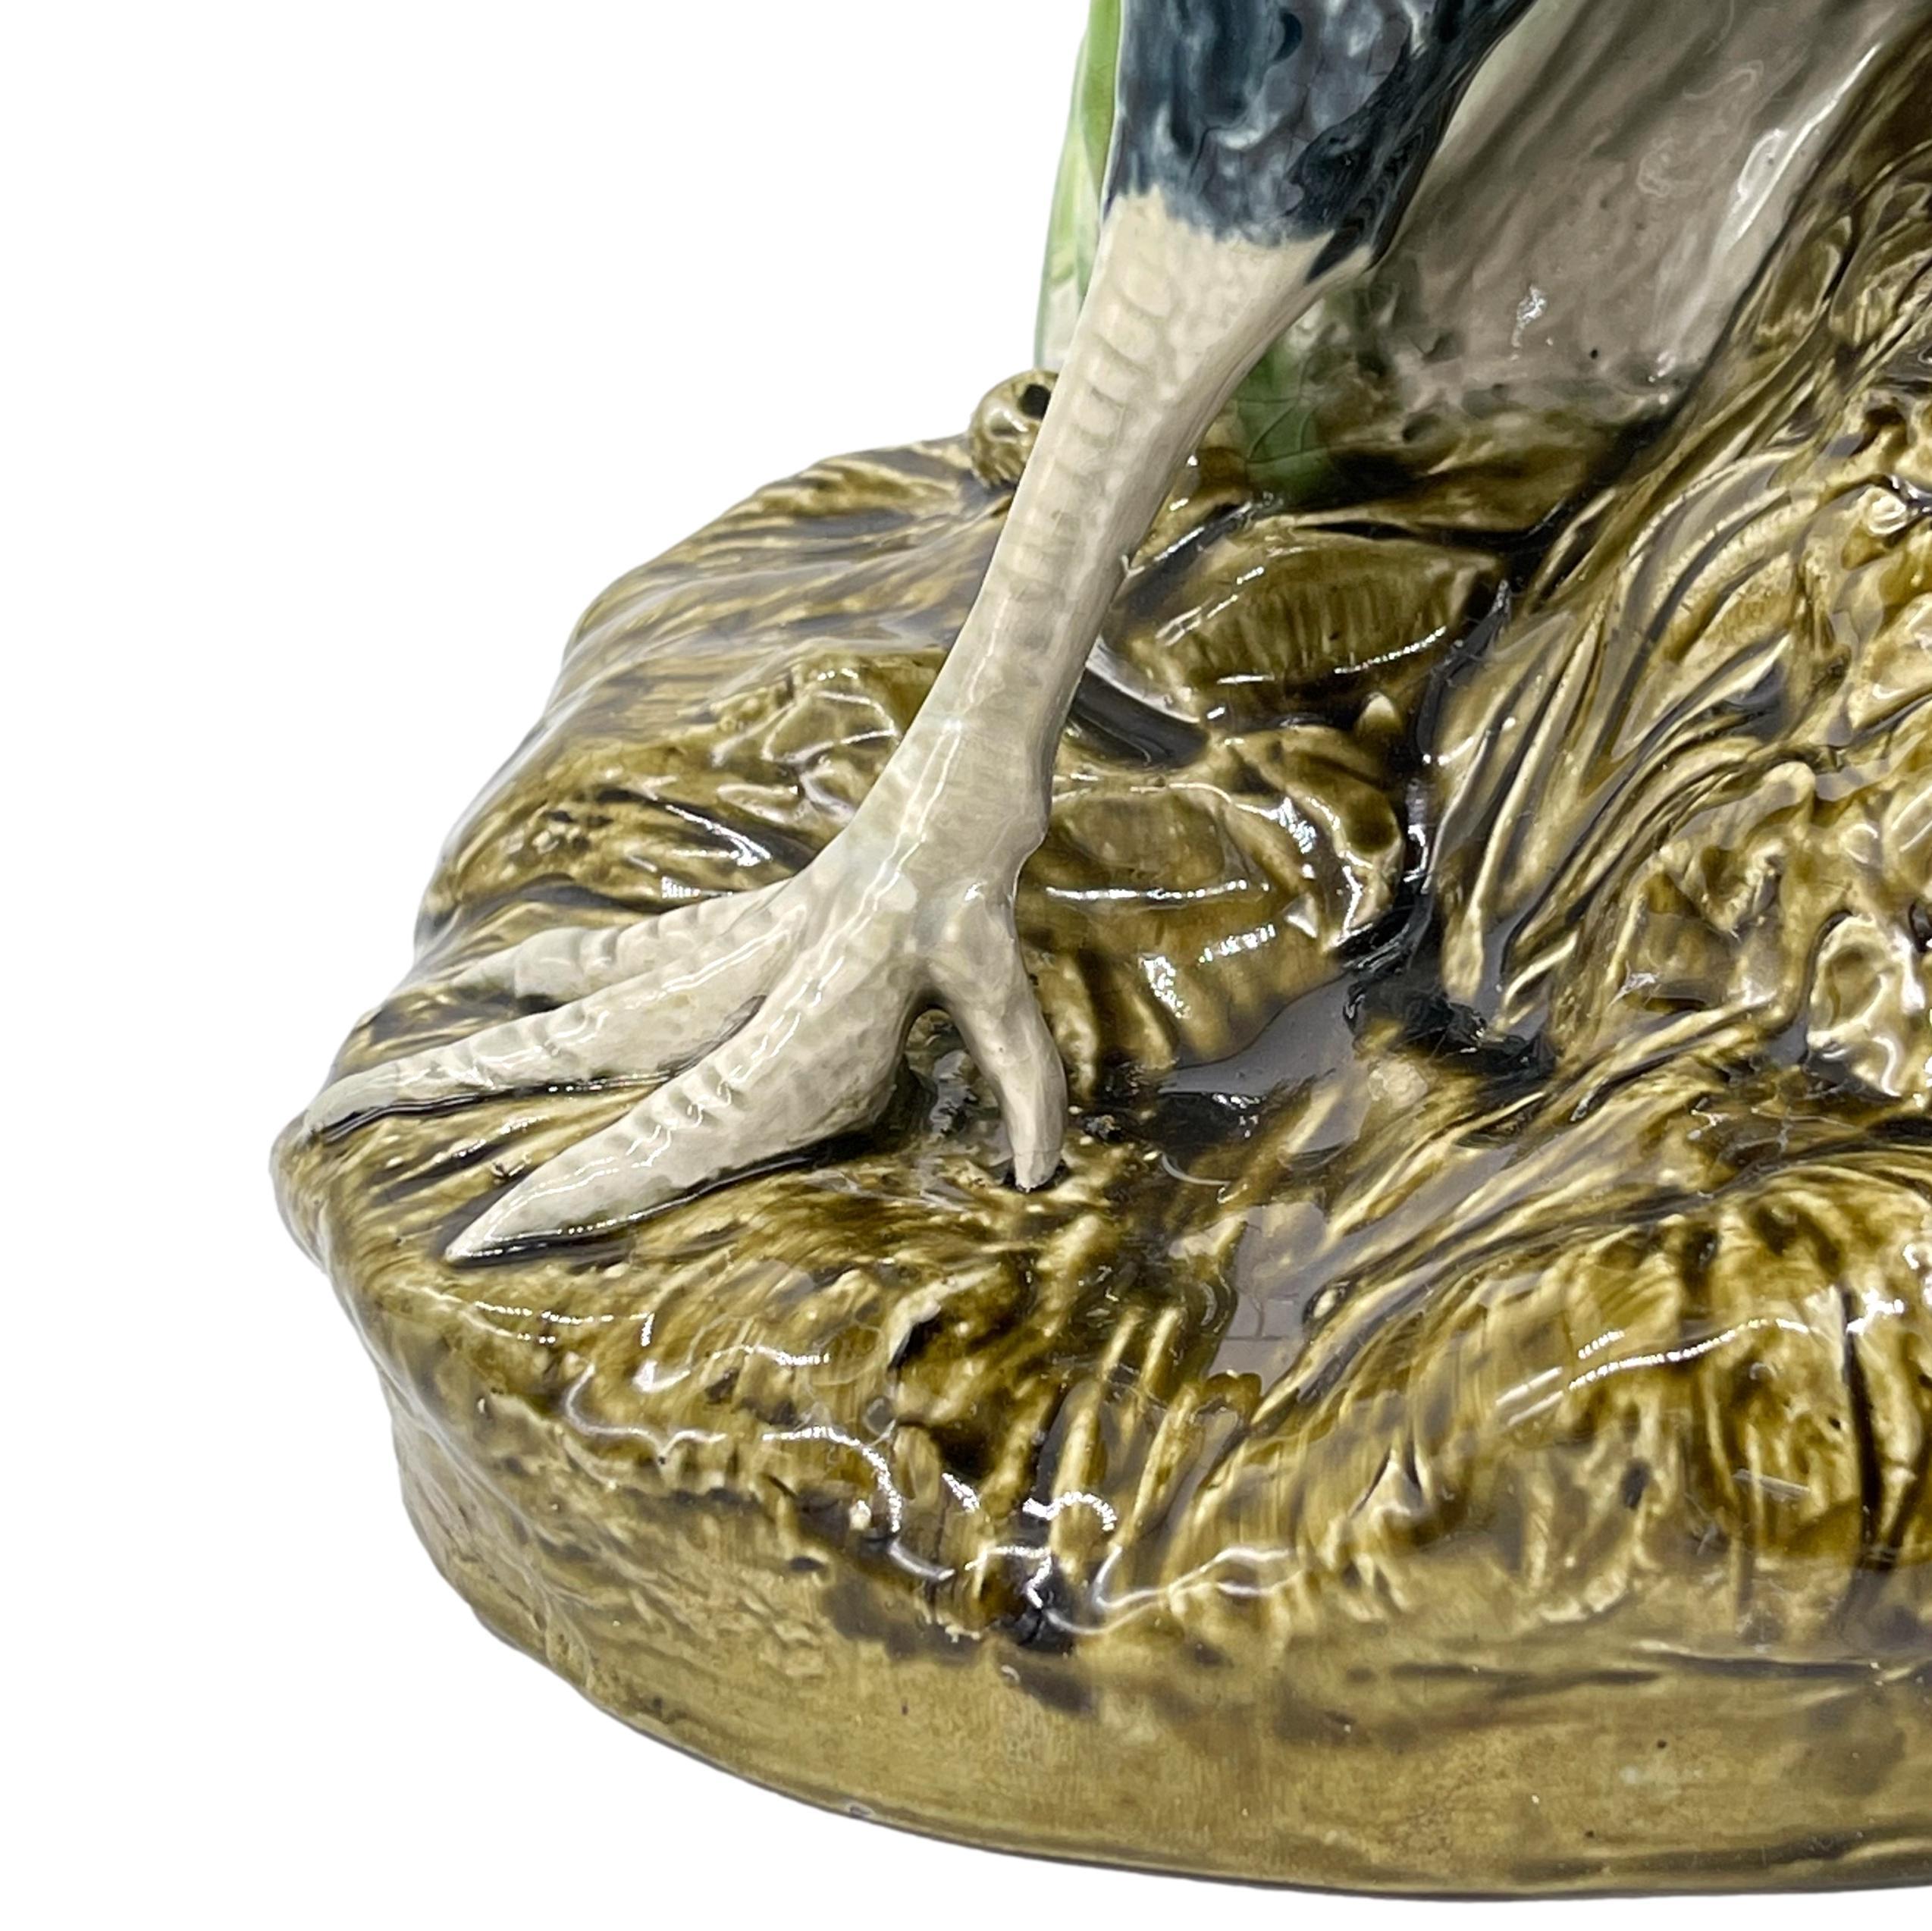 Majolica Rooster Large Spill Vase Signed Louis Carrier-Belleuse, French, ca 1890 For Sale 8